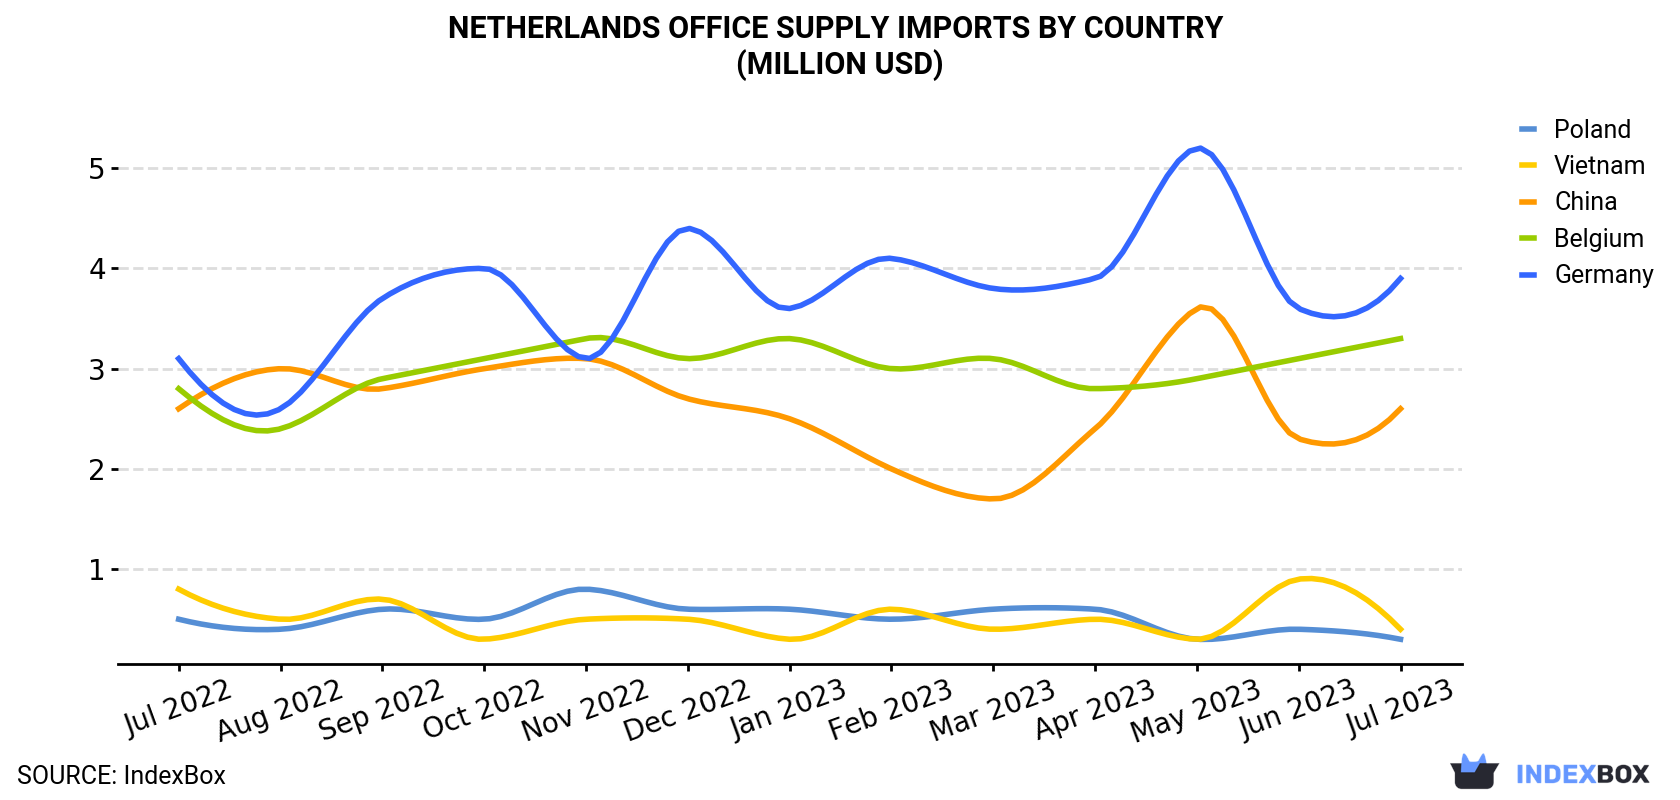 Netherlands Office Supply Imports By Country (Million USD)